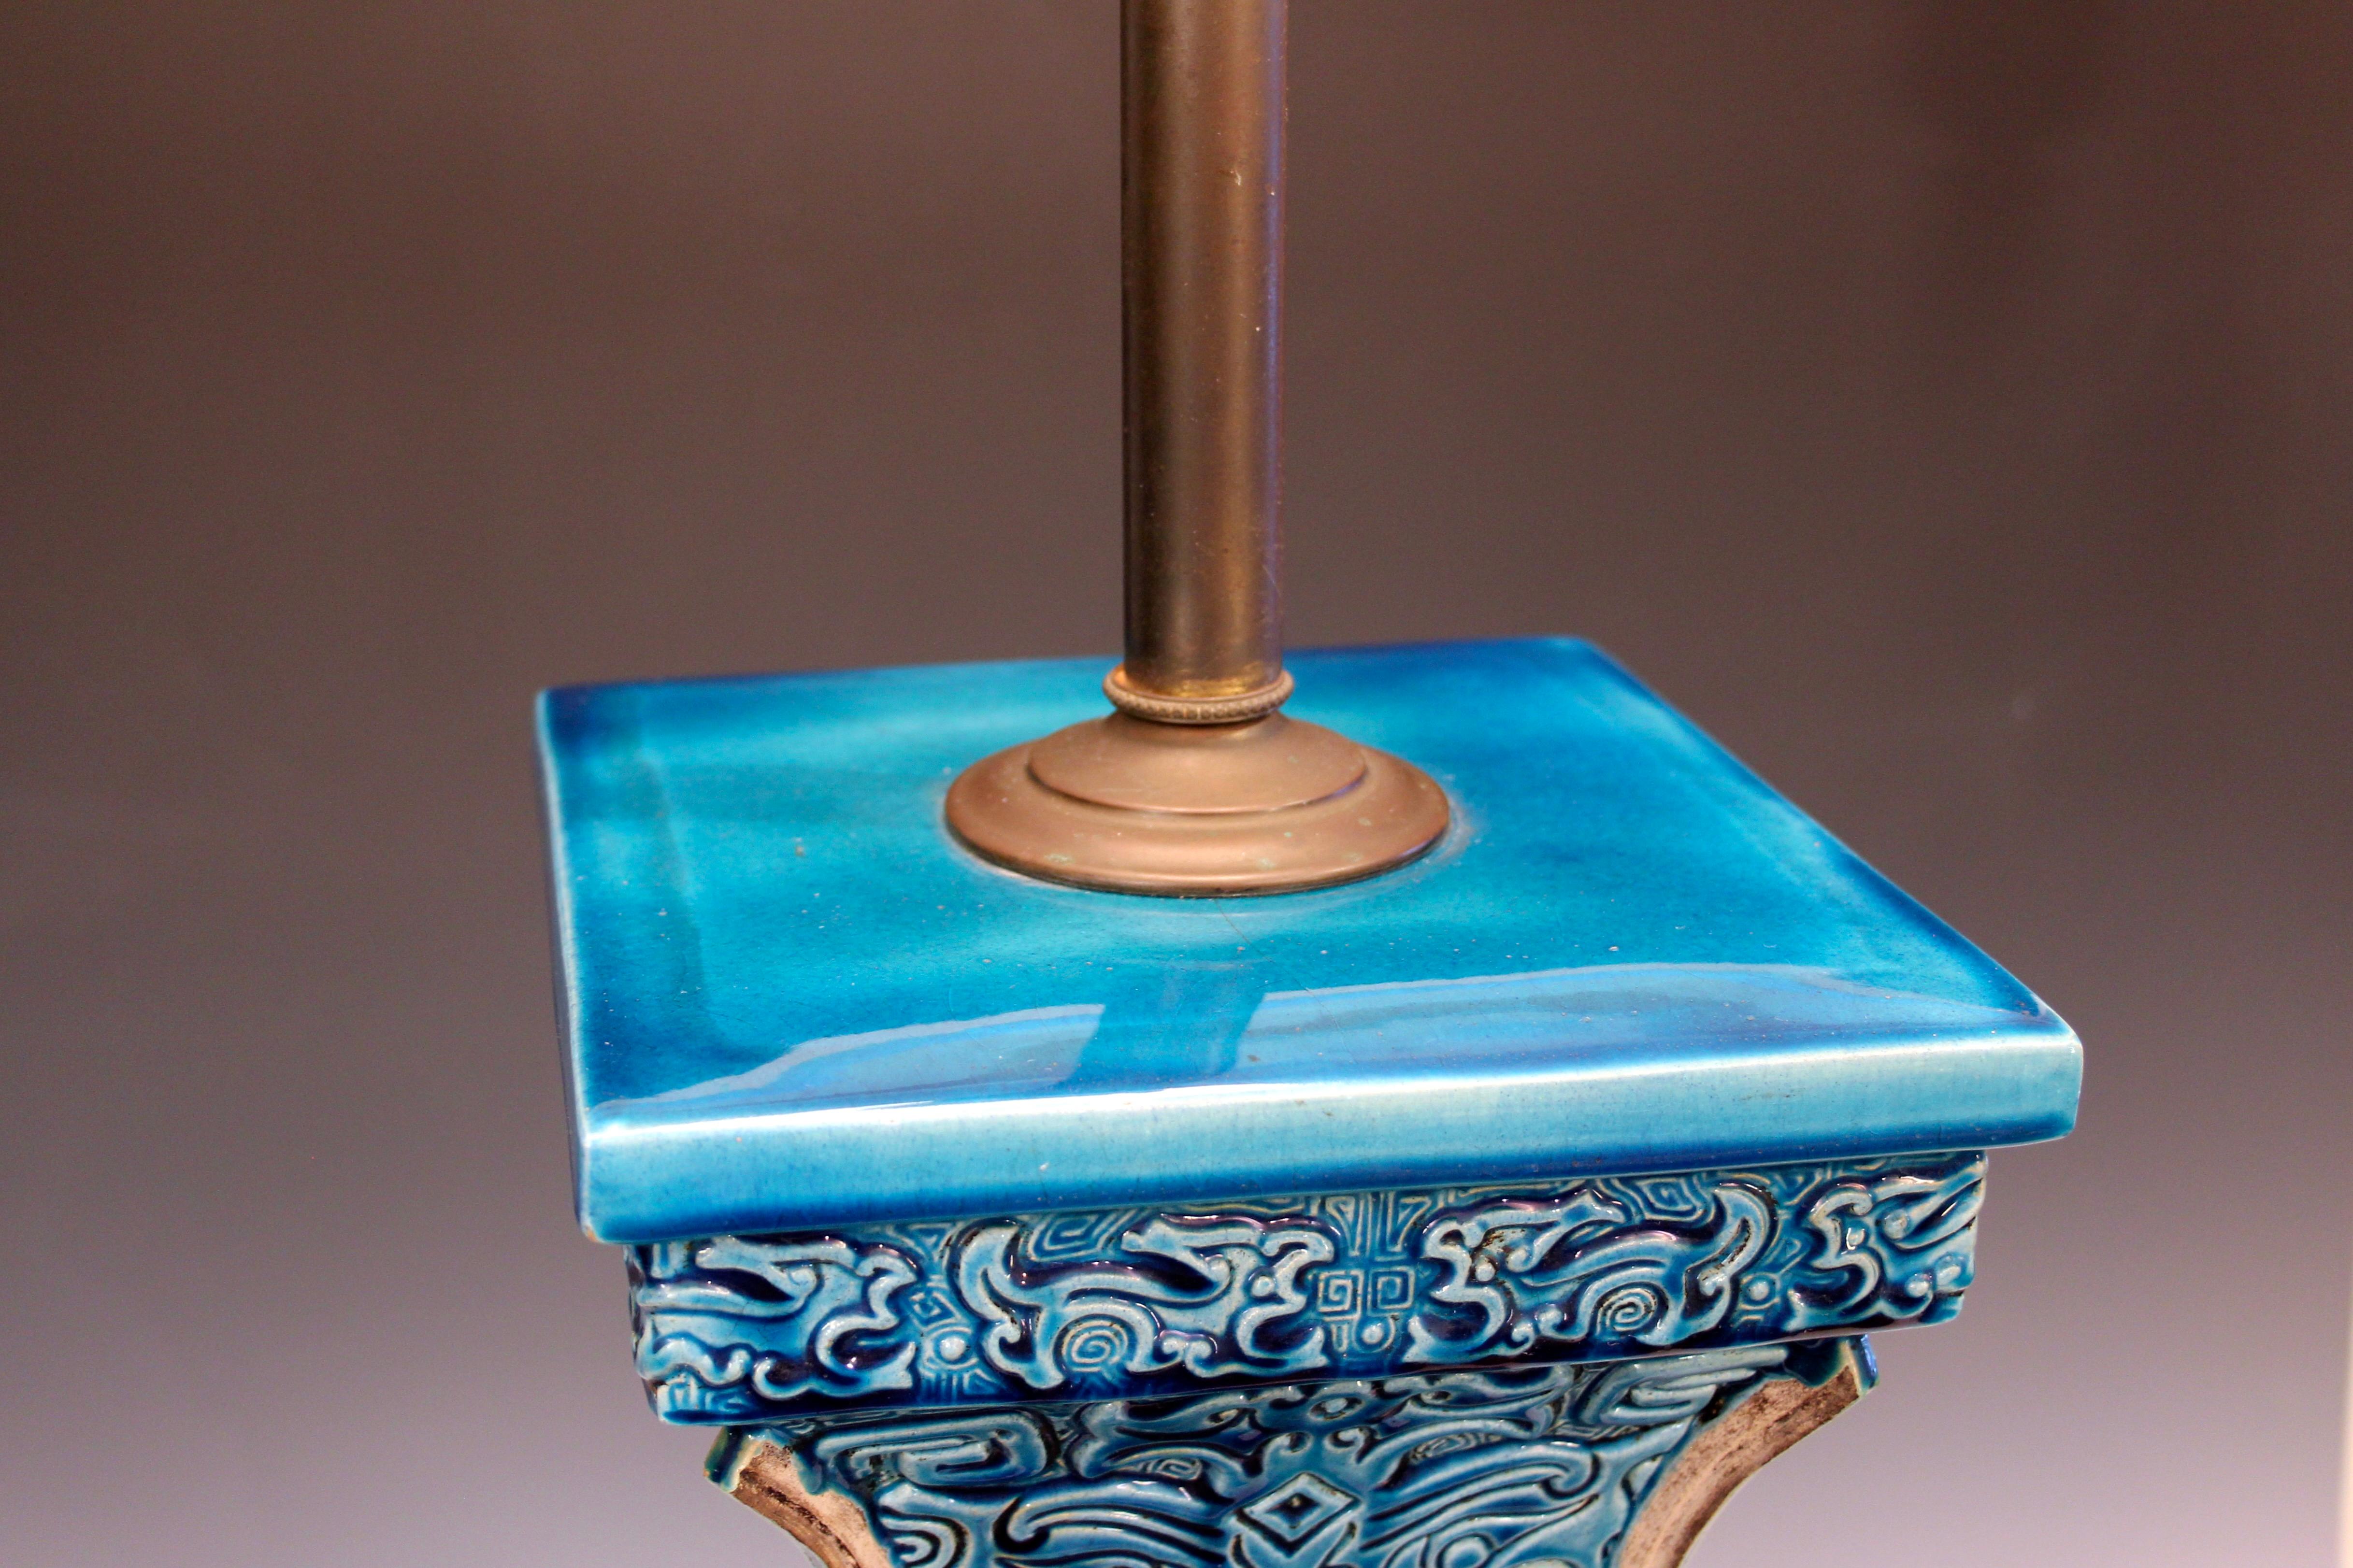 Huge Zaccagnini Pottery Mid Century Italian Ming Lamp Vintage 1950's Turquoise For Sale 1